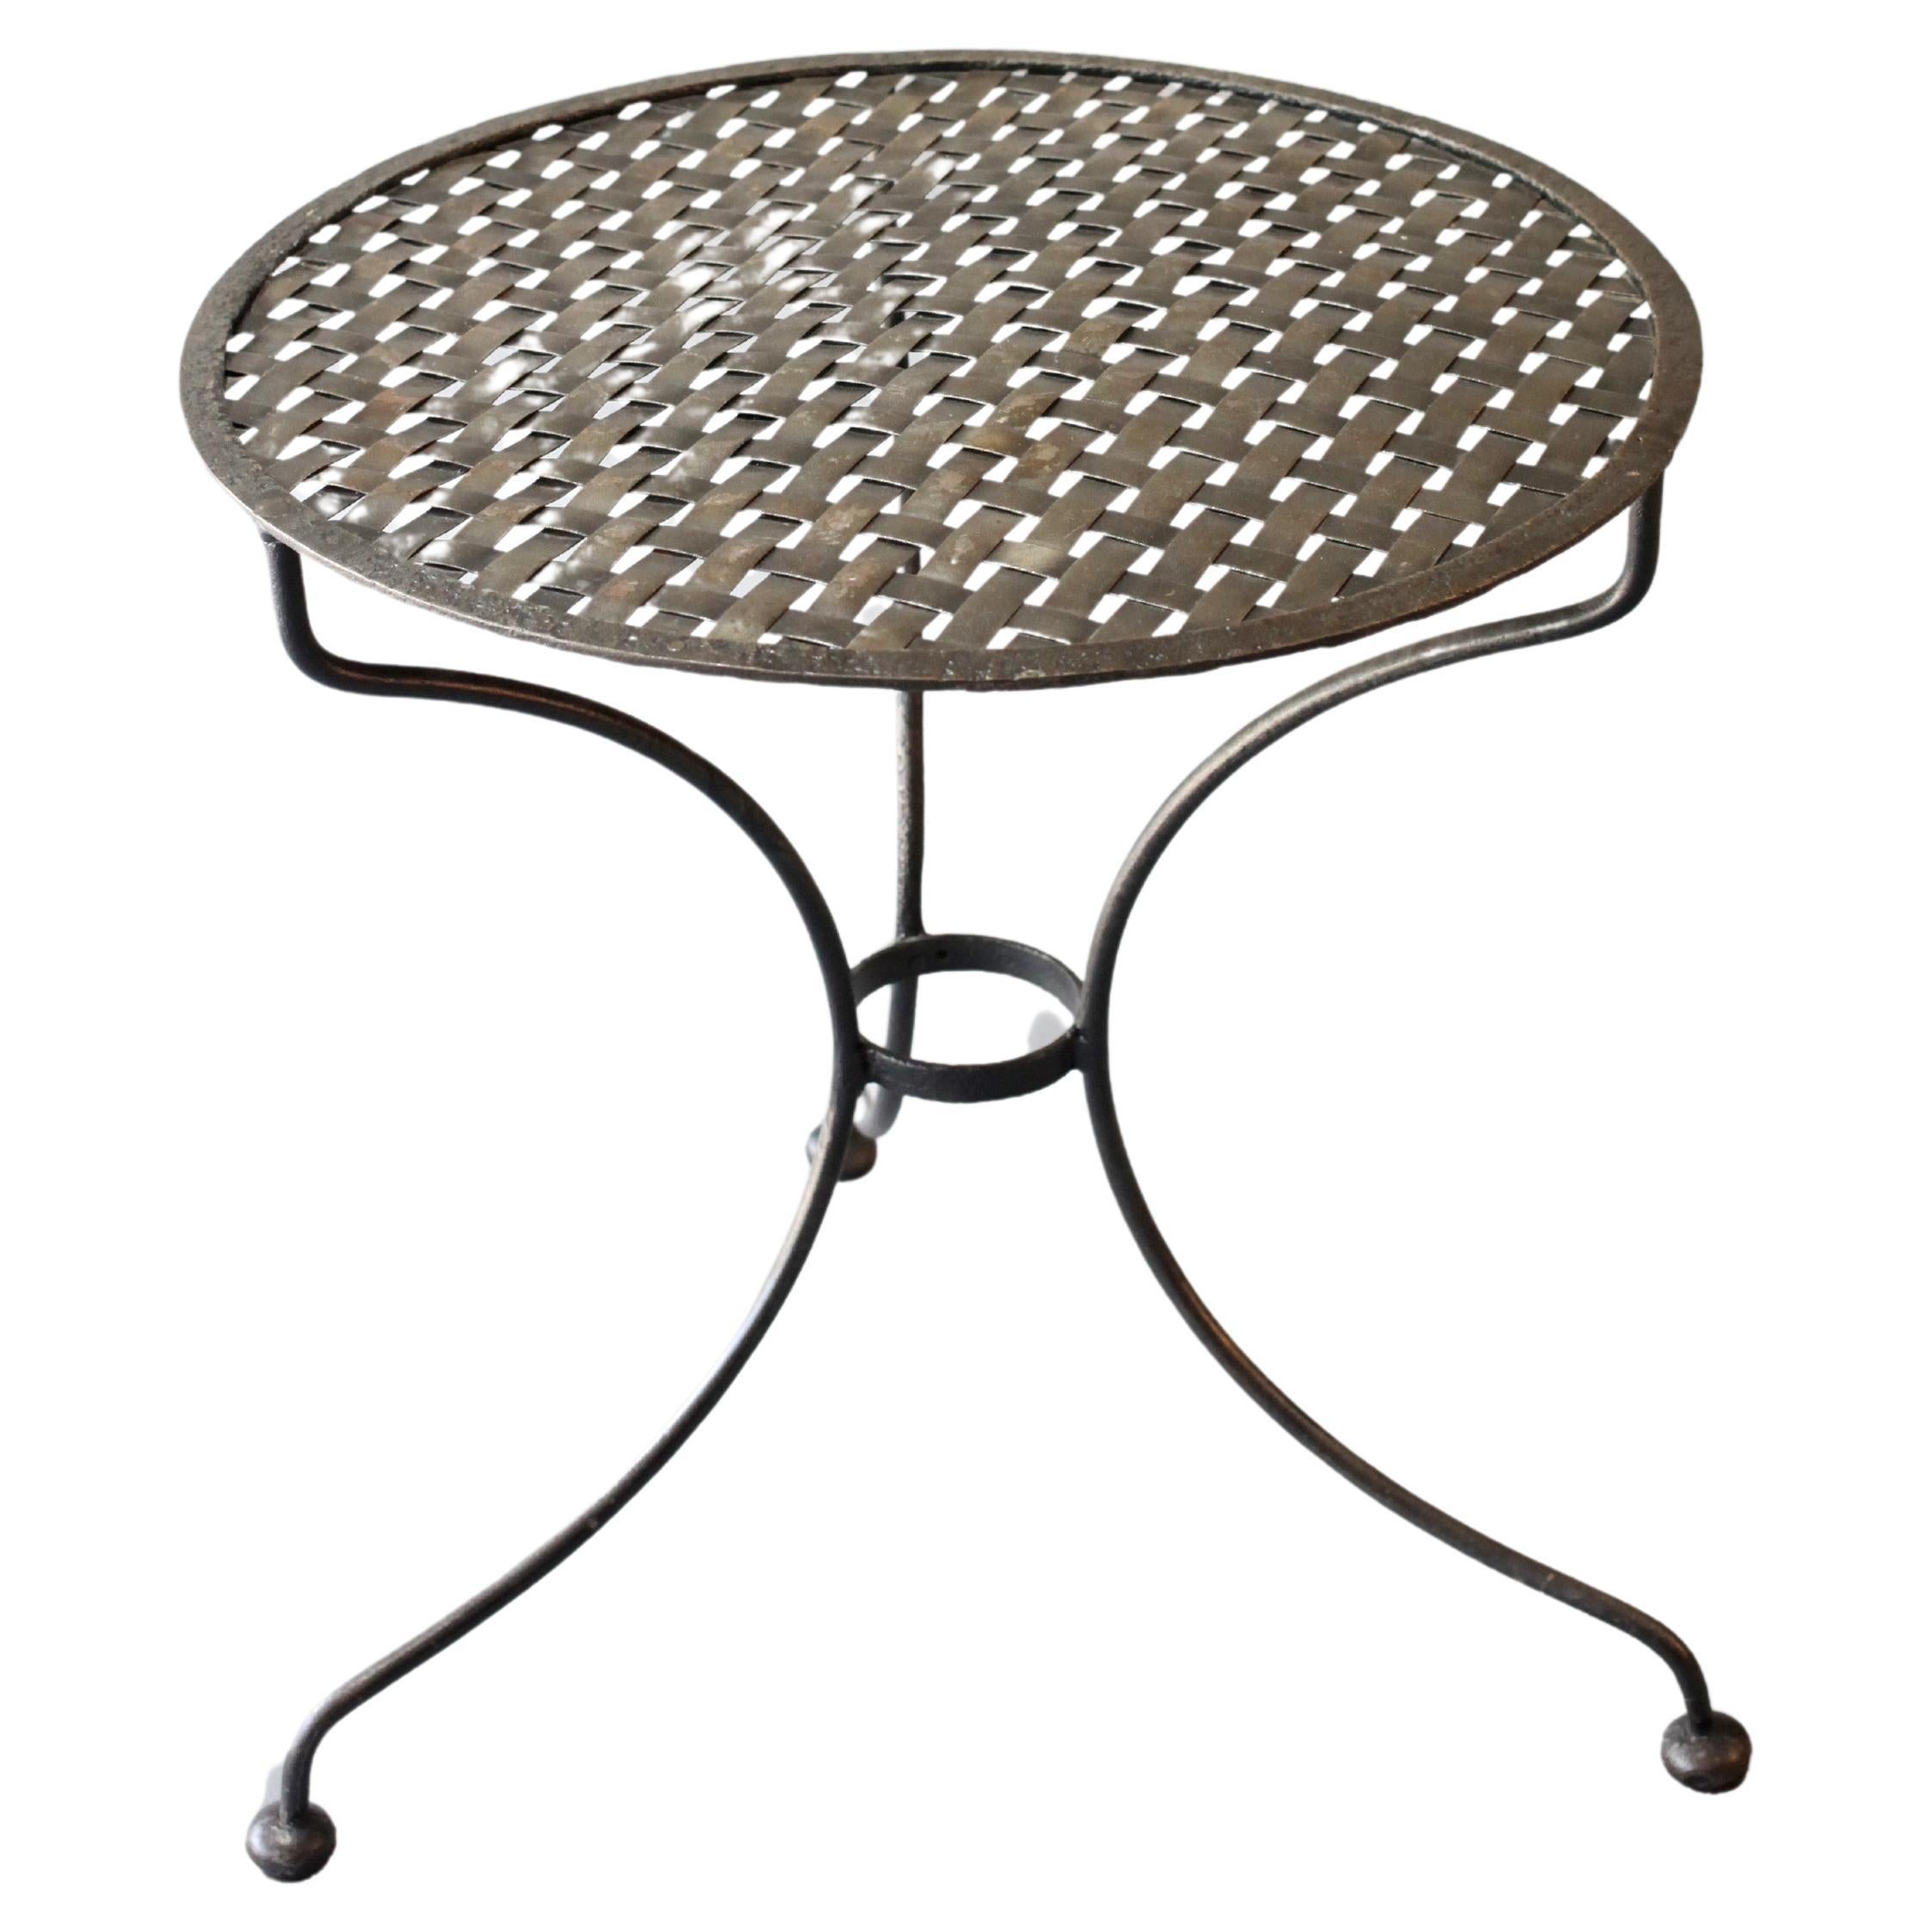 Rare 19th Century French Forged Iron Gueridon Garden Bistro Table For Sale